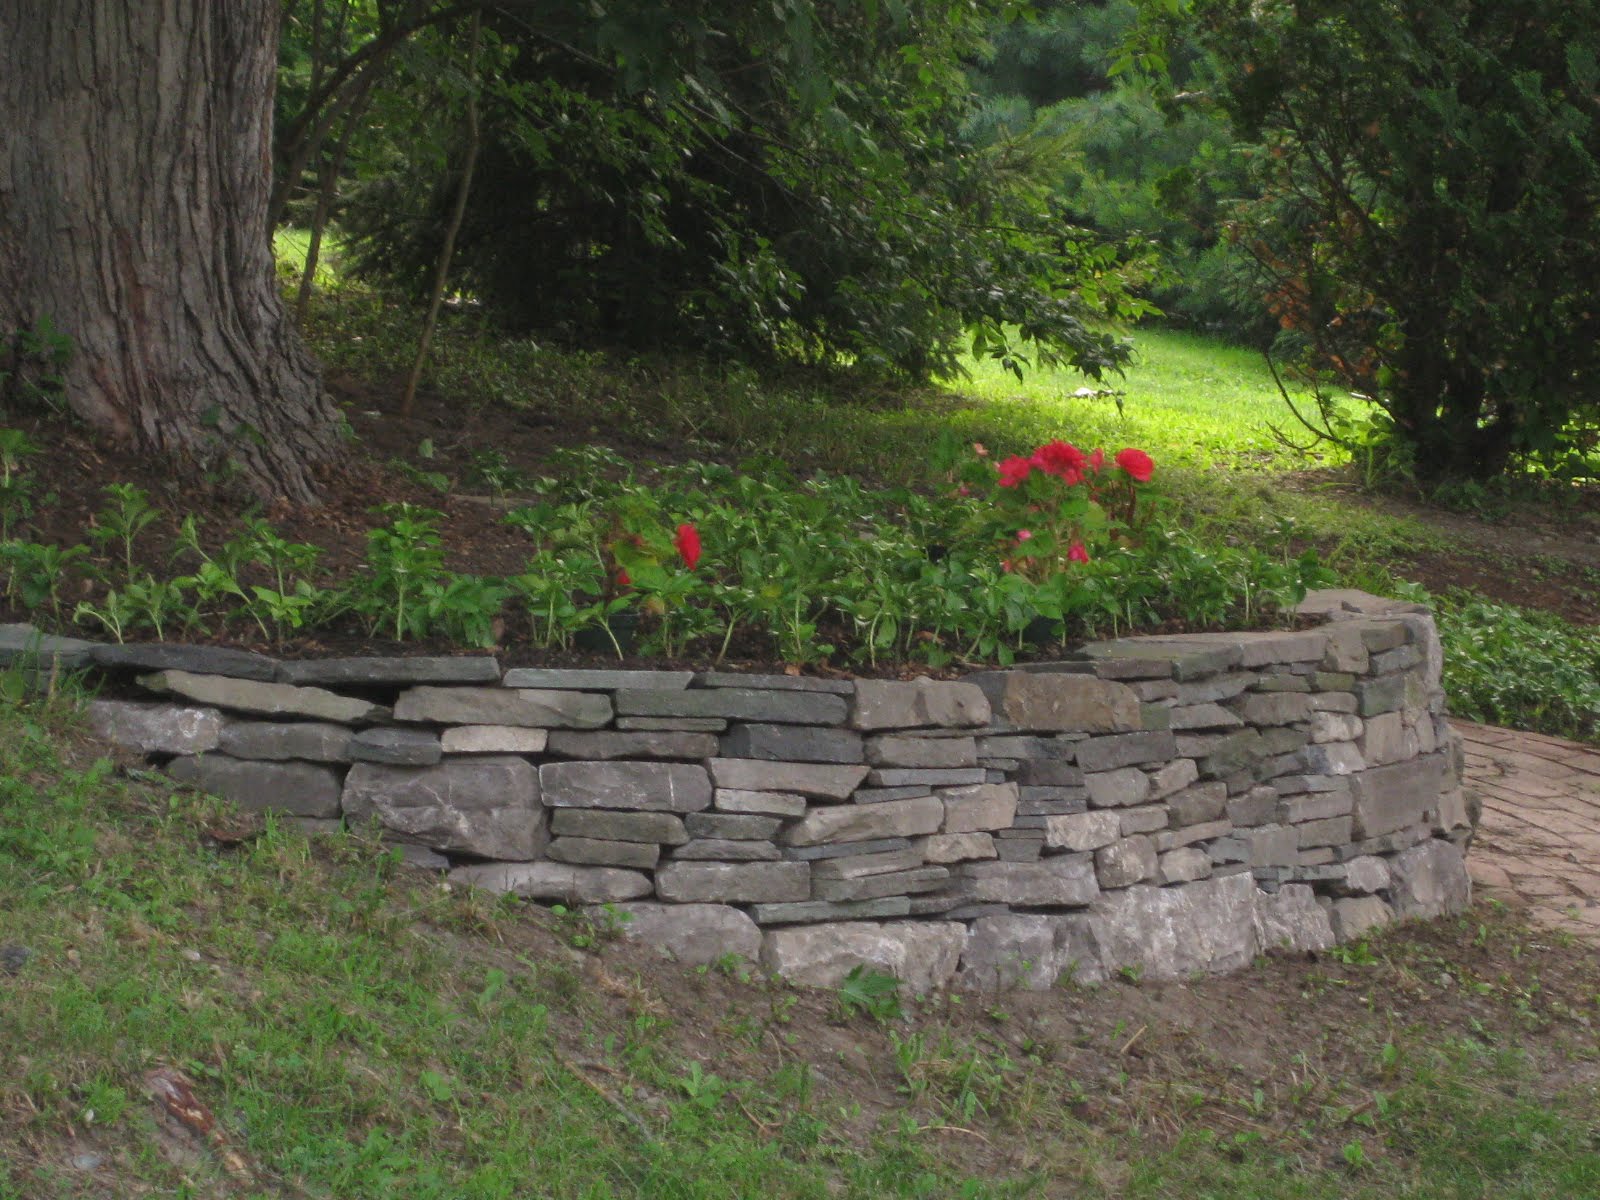 How to build a retaining wall around a tree on a slope